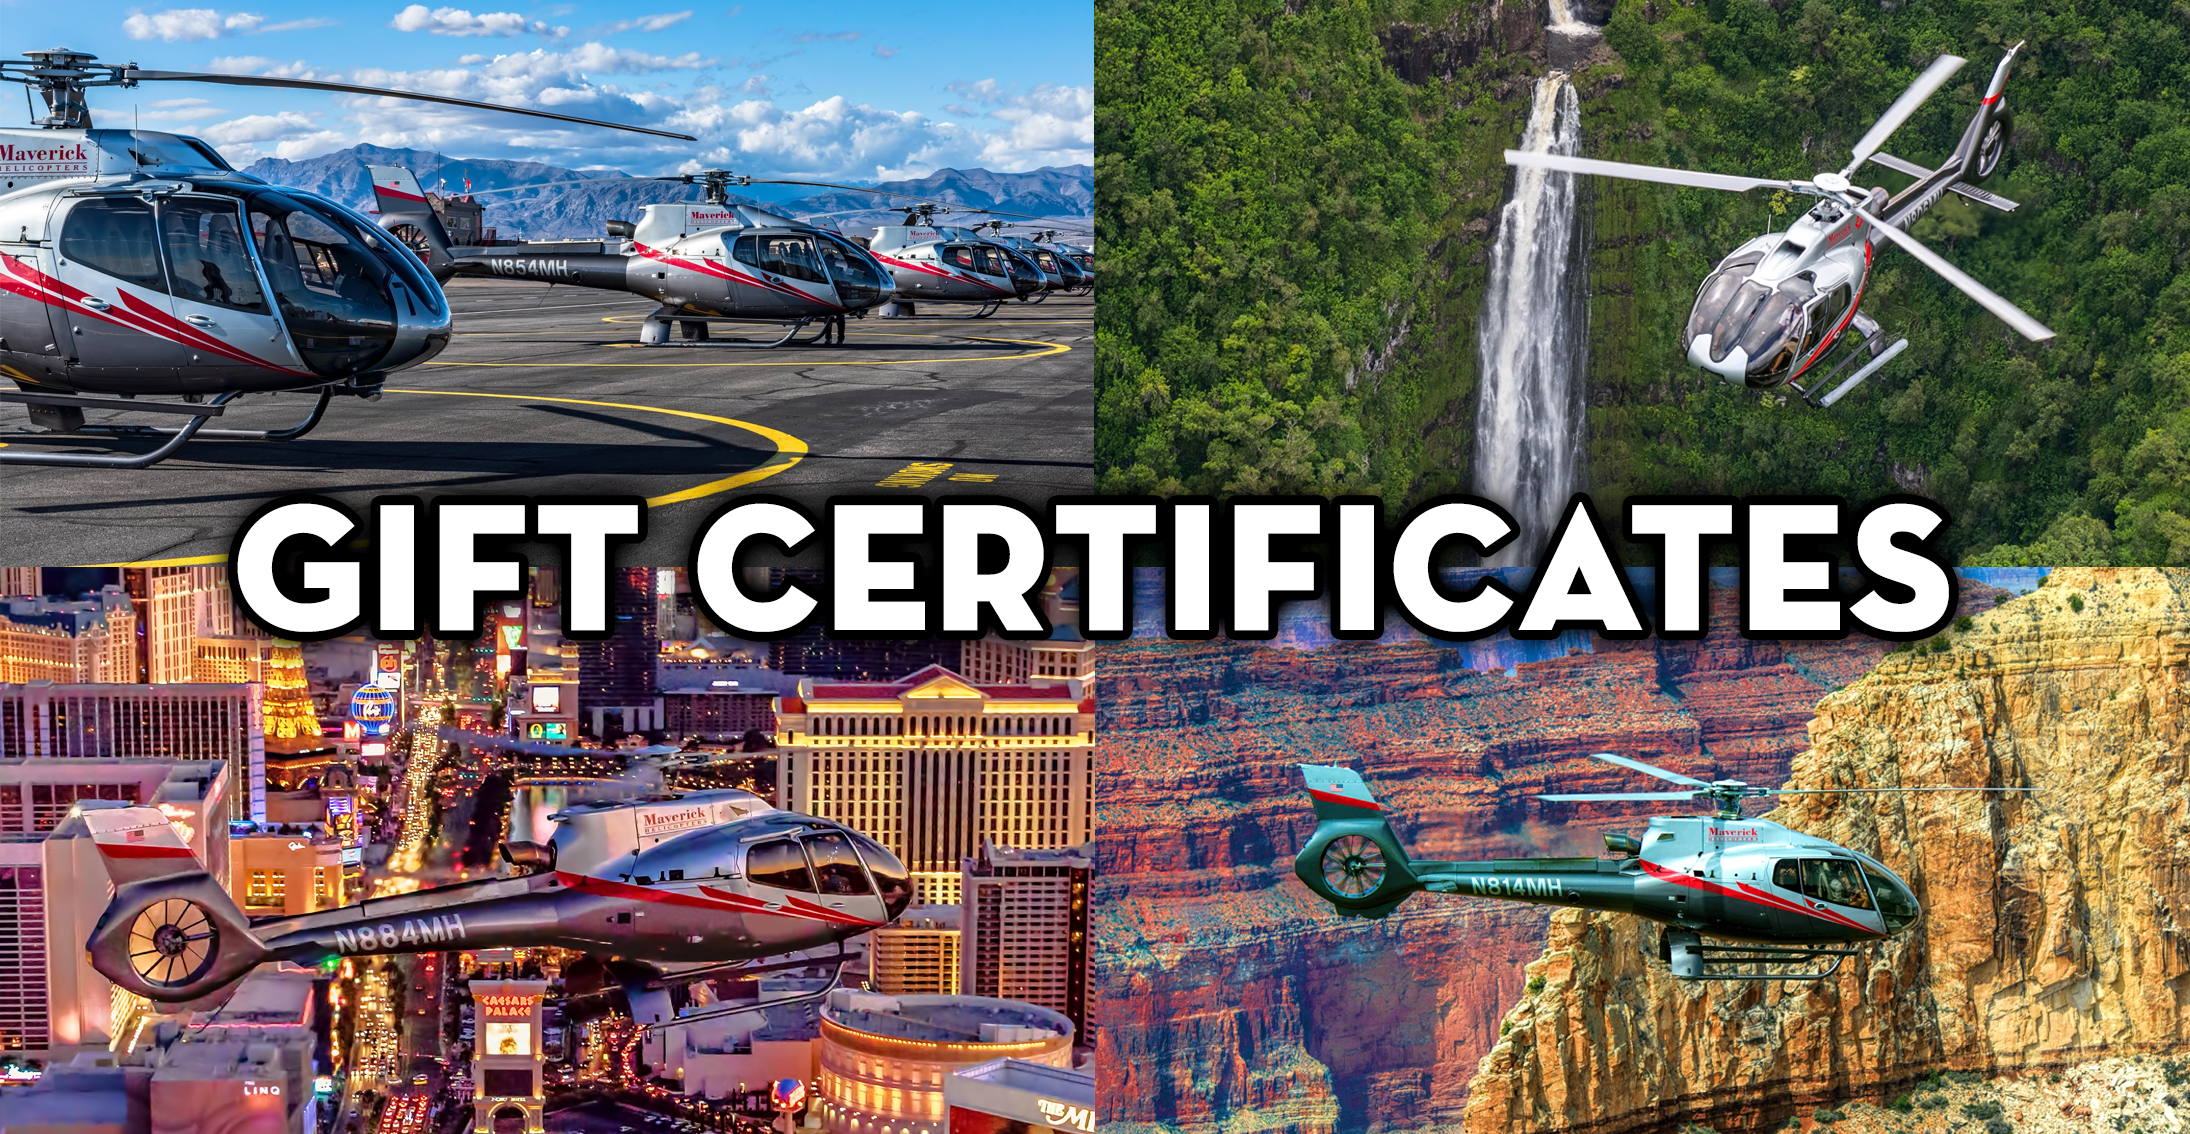 Gift certificates for a Grand Canyon, Hawaii or Las Vegas helicopter tour